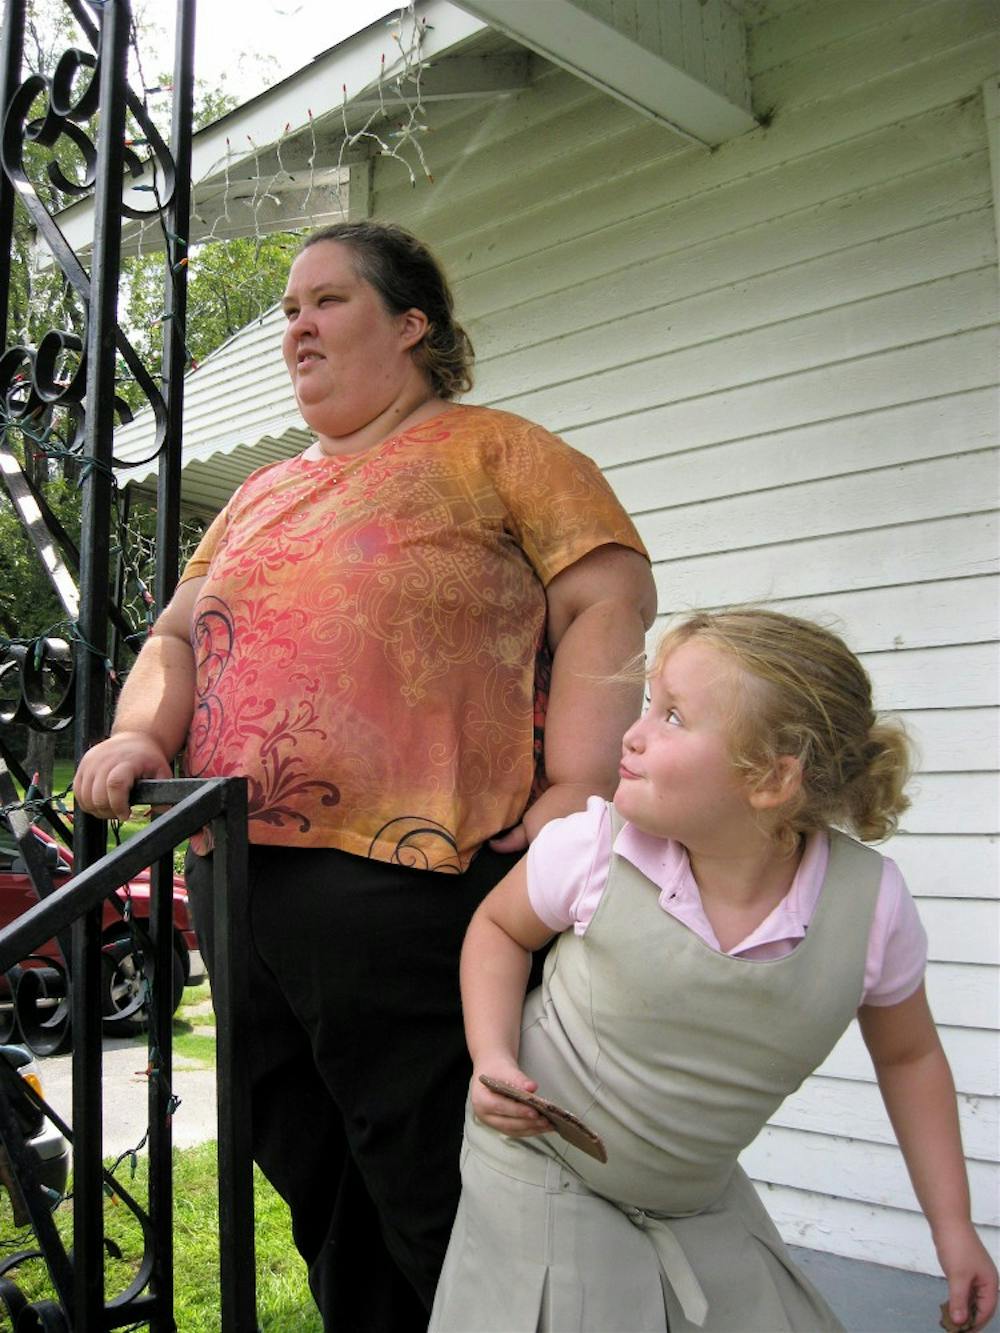 The breakout star of &quot;Toddlers and Tiaras,&quot; Alana &quot;Honey Boo Boo&quot; Thompson, right, appears with her mom June Shannon in McIntyre, Ga. The show &quot;Honey Boo Boo&quot; was recently canceled. MCT PHOTO